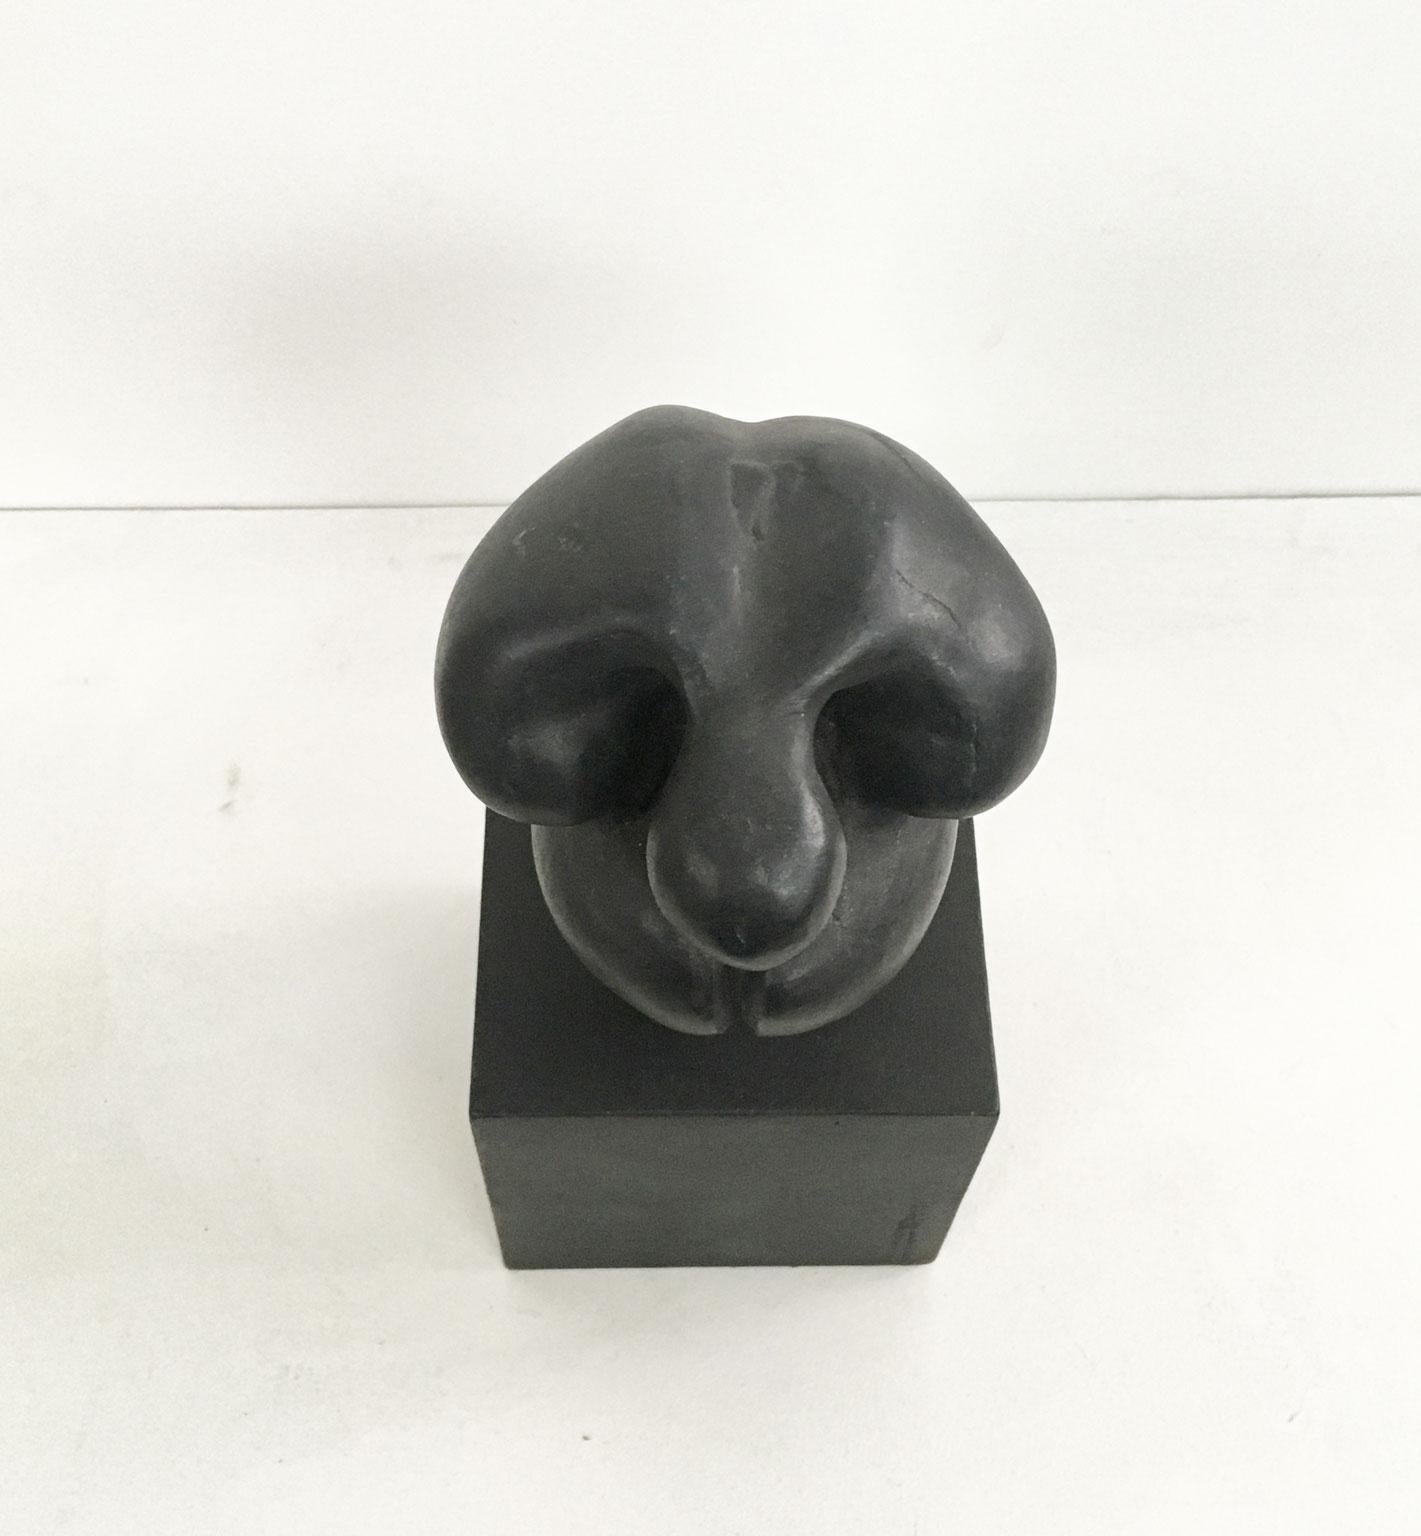 1988 Italy Black Aluminum Abstract Sculpture by Patrizia Guerresi Title Deji For Sale 2